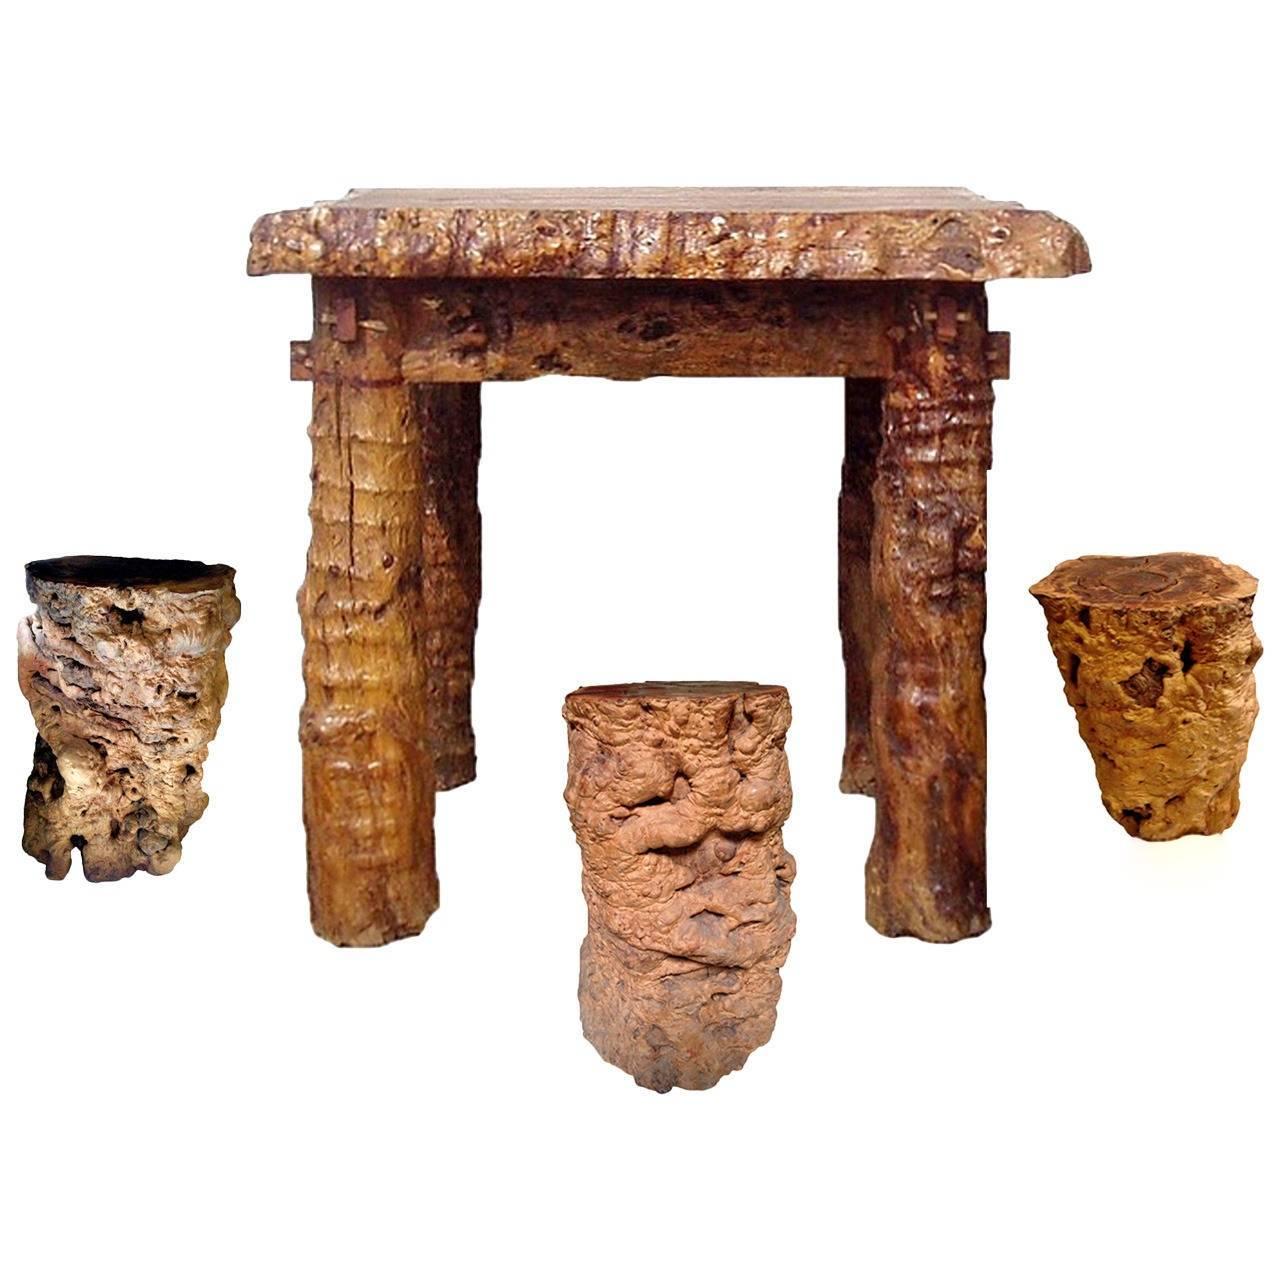 Rustic Log Country Table with Stools, Burl Jujube Solid Wood Table Set of Four